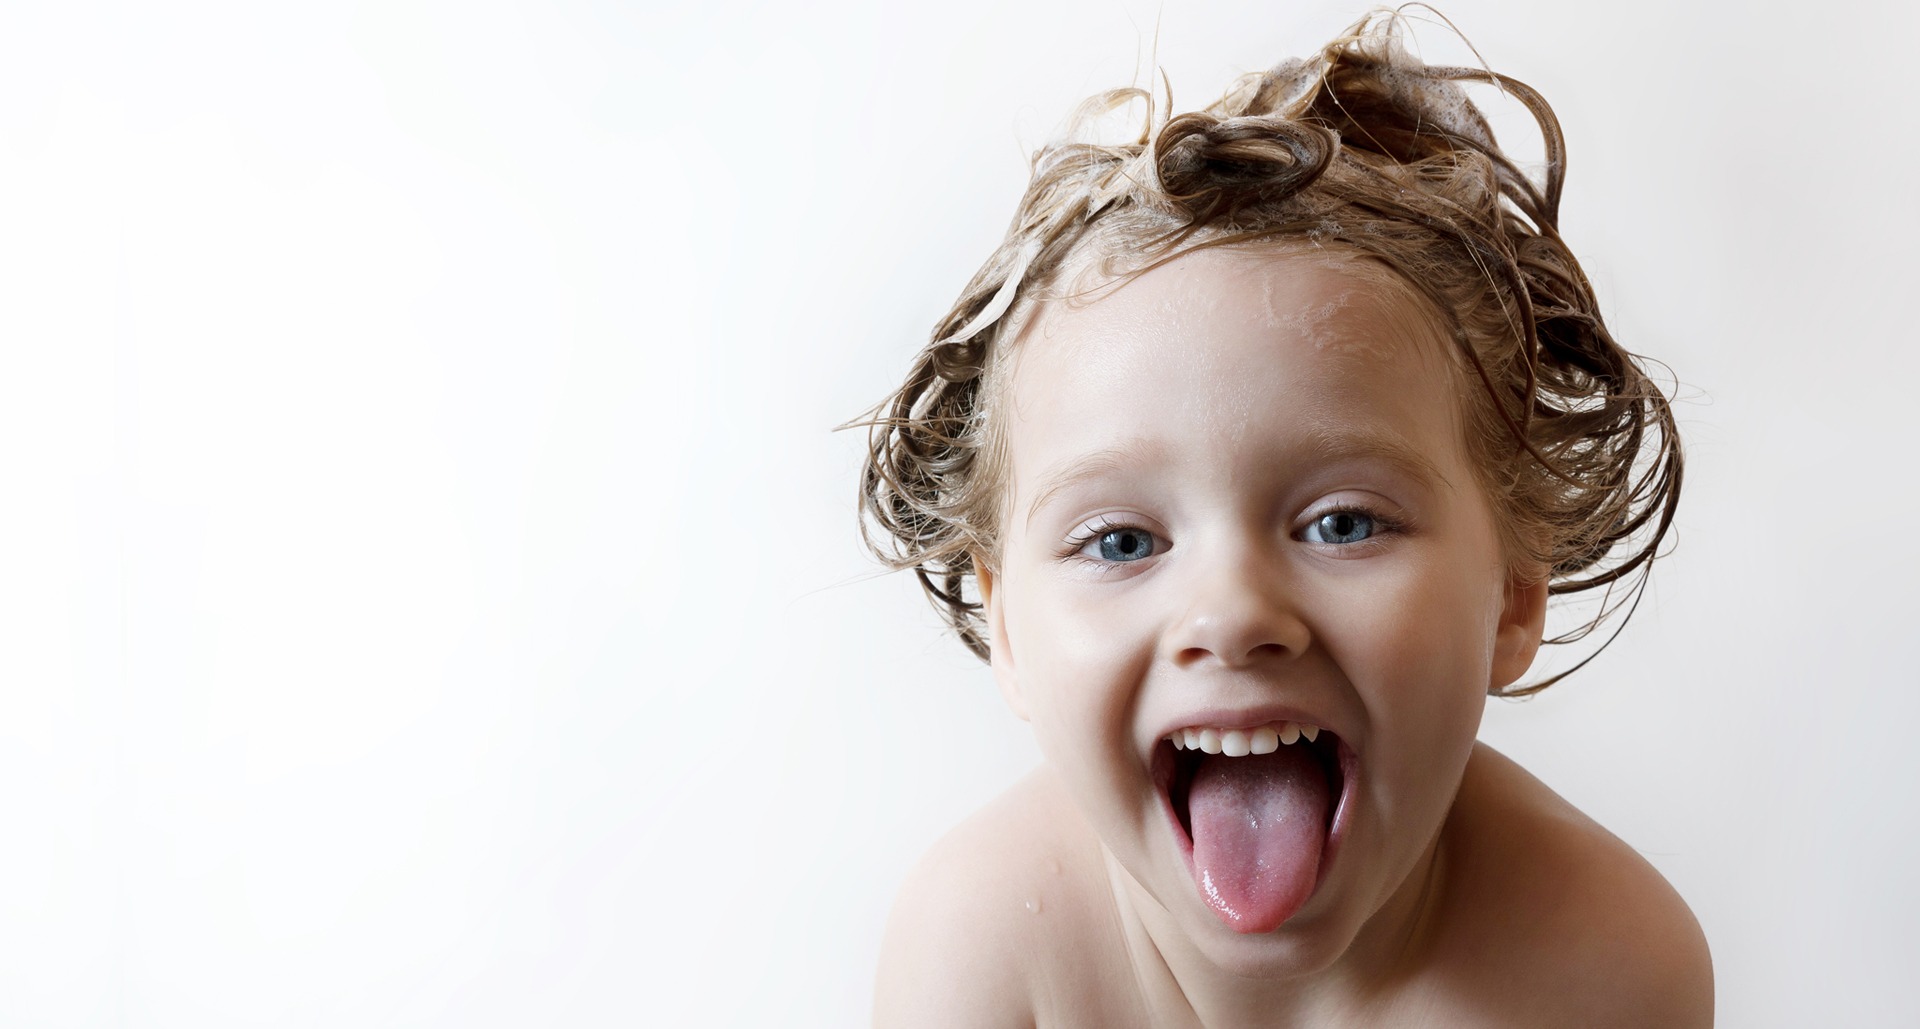 What is the best shampoo for children? 